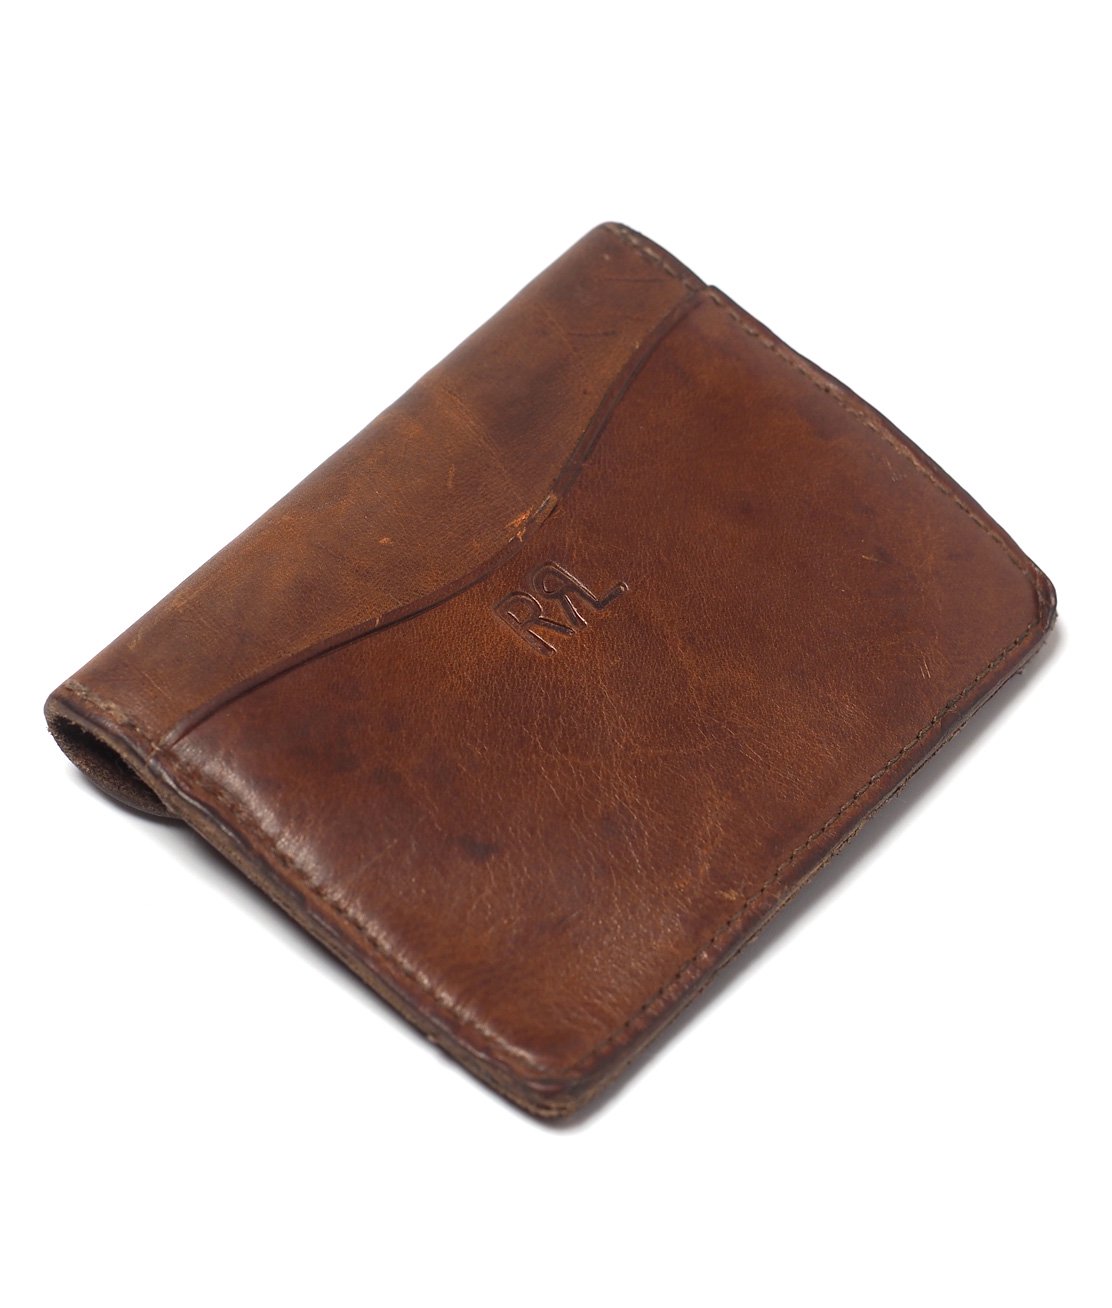 【RRL】TUMBLED LEATHER CARD WALLET - DARK BROWN